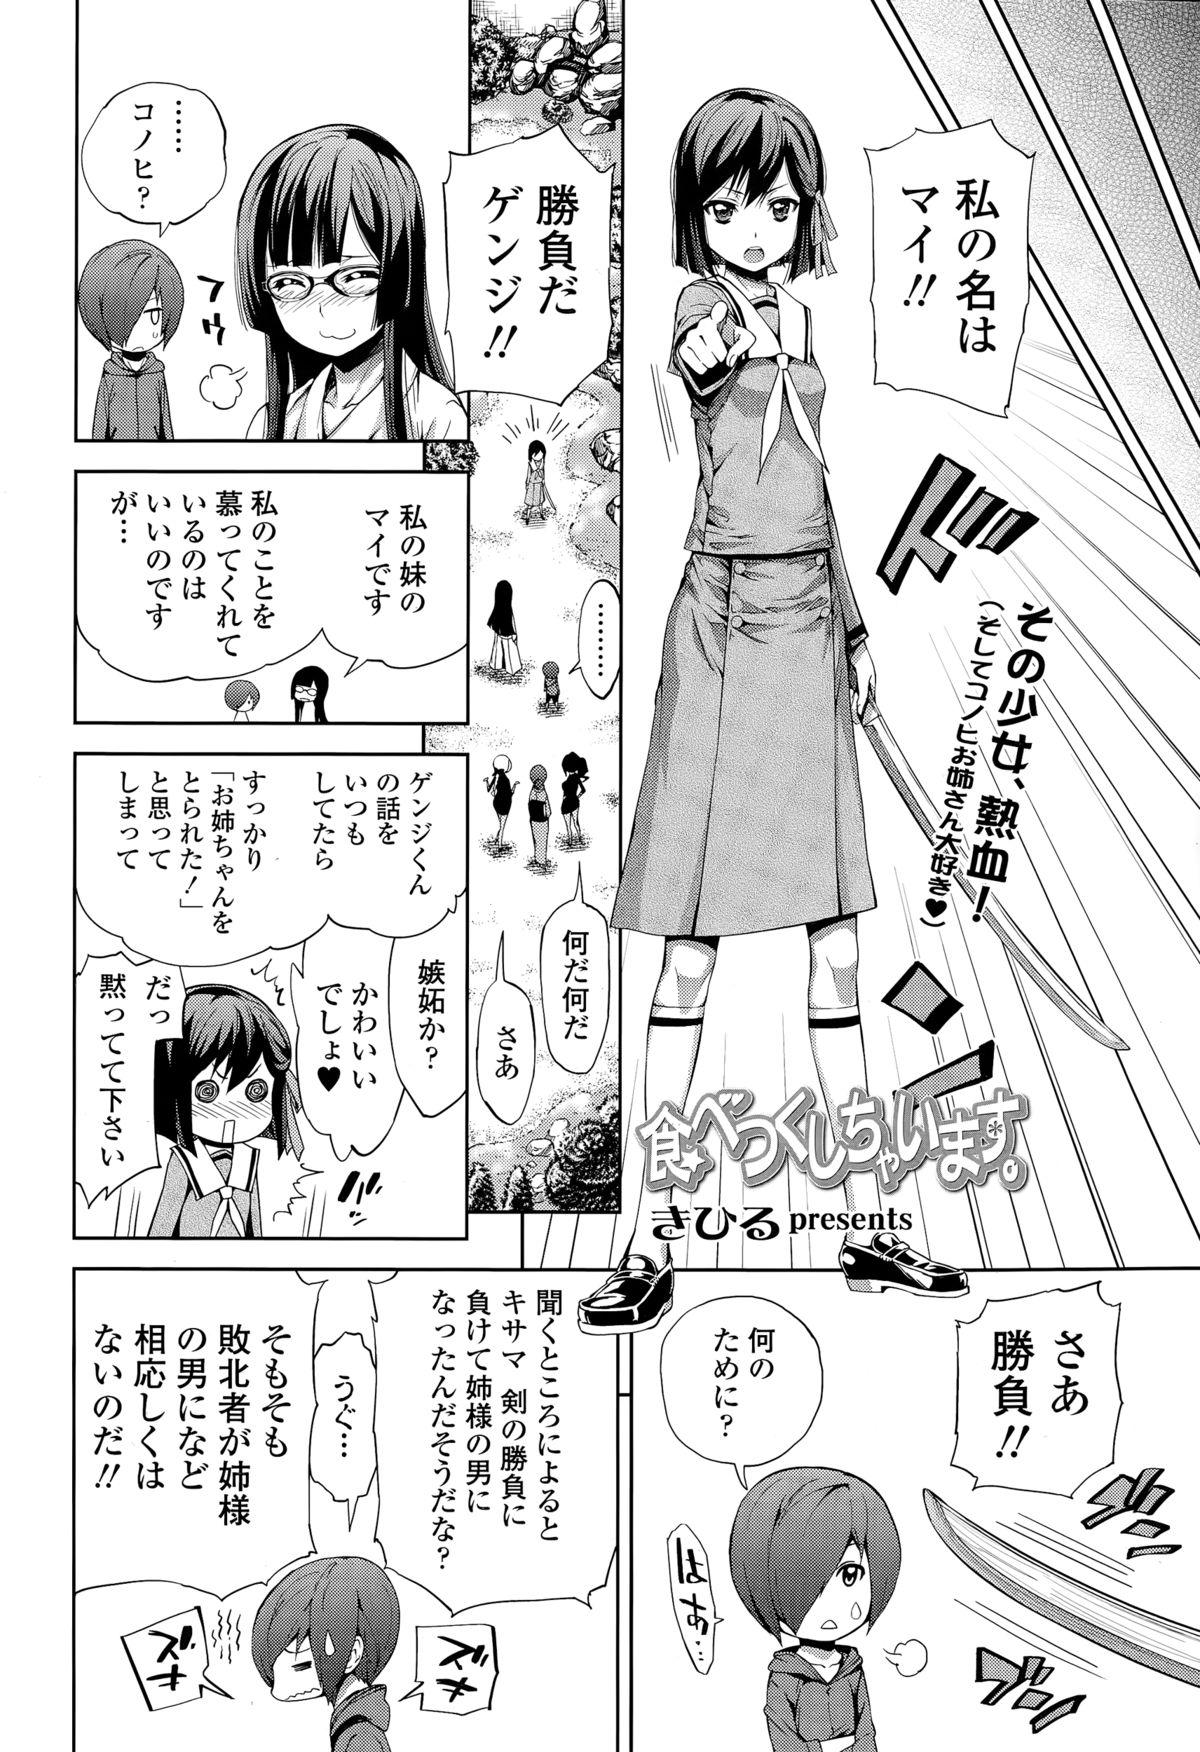 Stepson COMIC Tenma 2015-03 Unshaved - Page 6